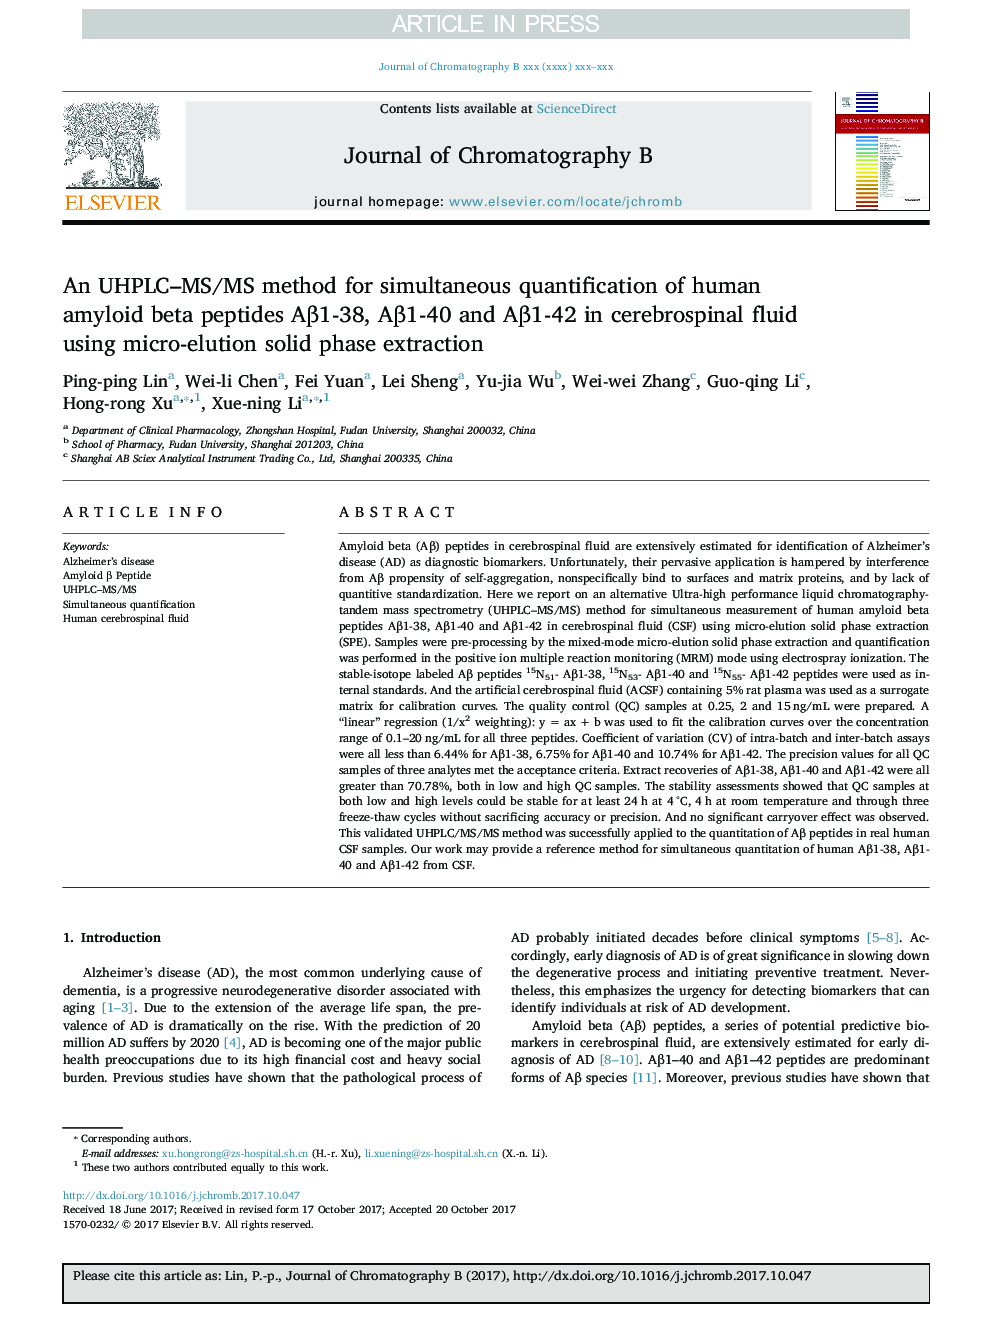 An UHPLC-MS/MS method for simultaneous quantification of human amyloid beta peptides AÎ²1-38, AÎ²1-40 and AÎ²1-42 in cerebrospinal fluid using micro-elution solid phase extraction